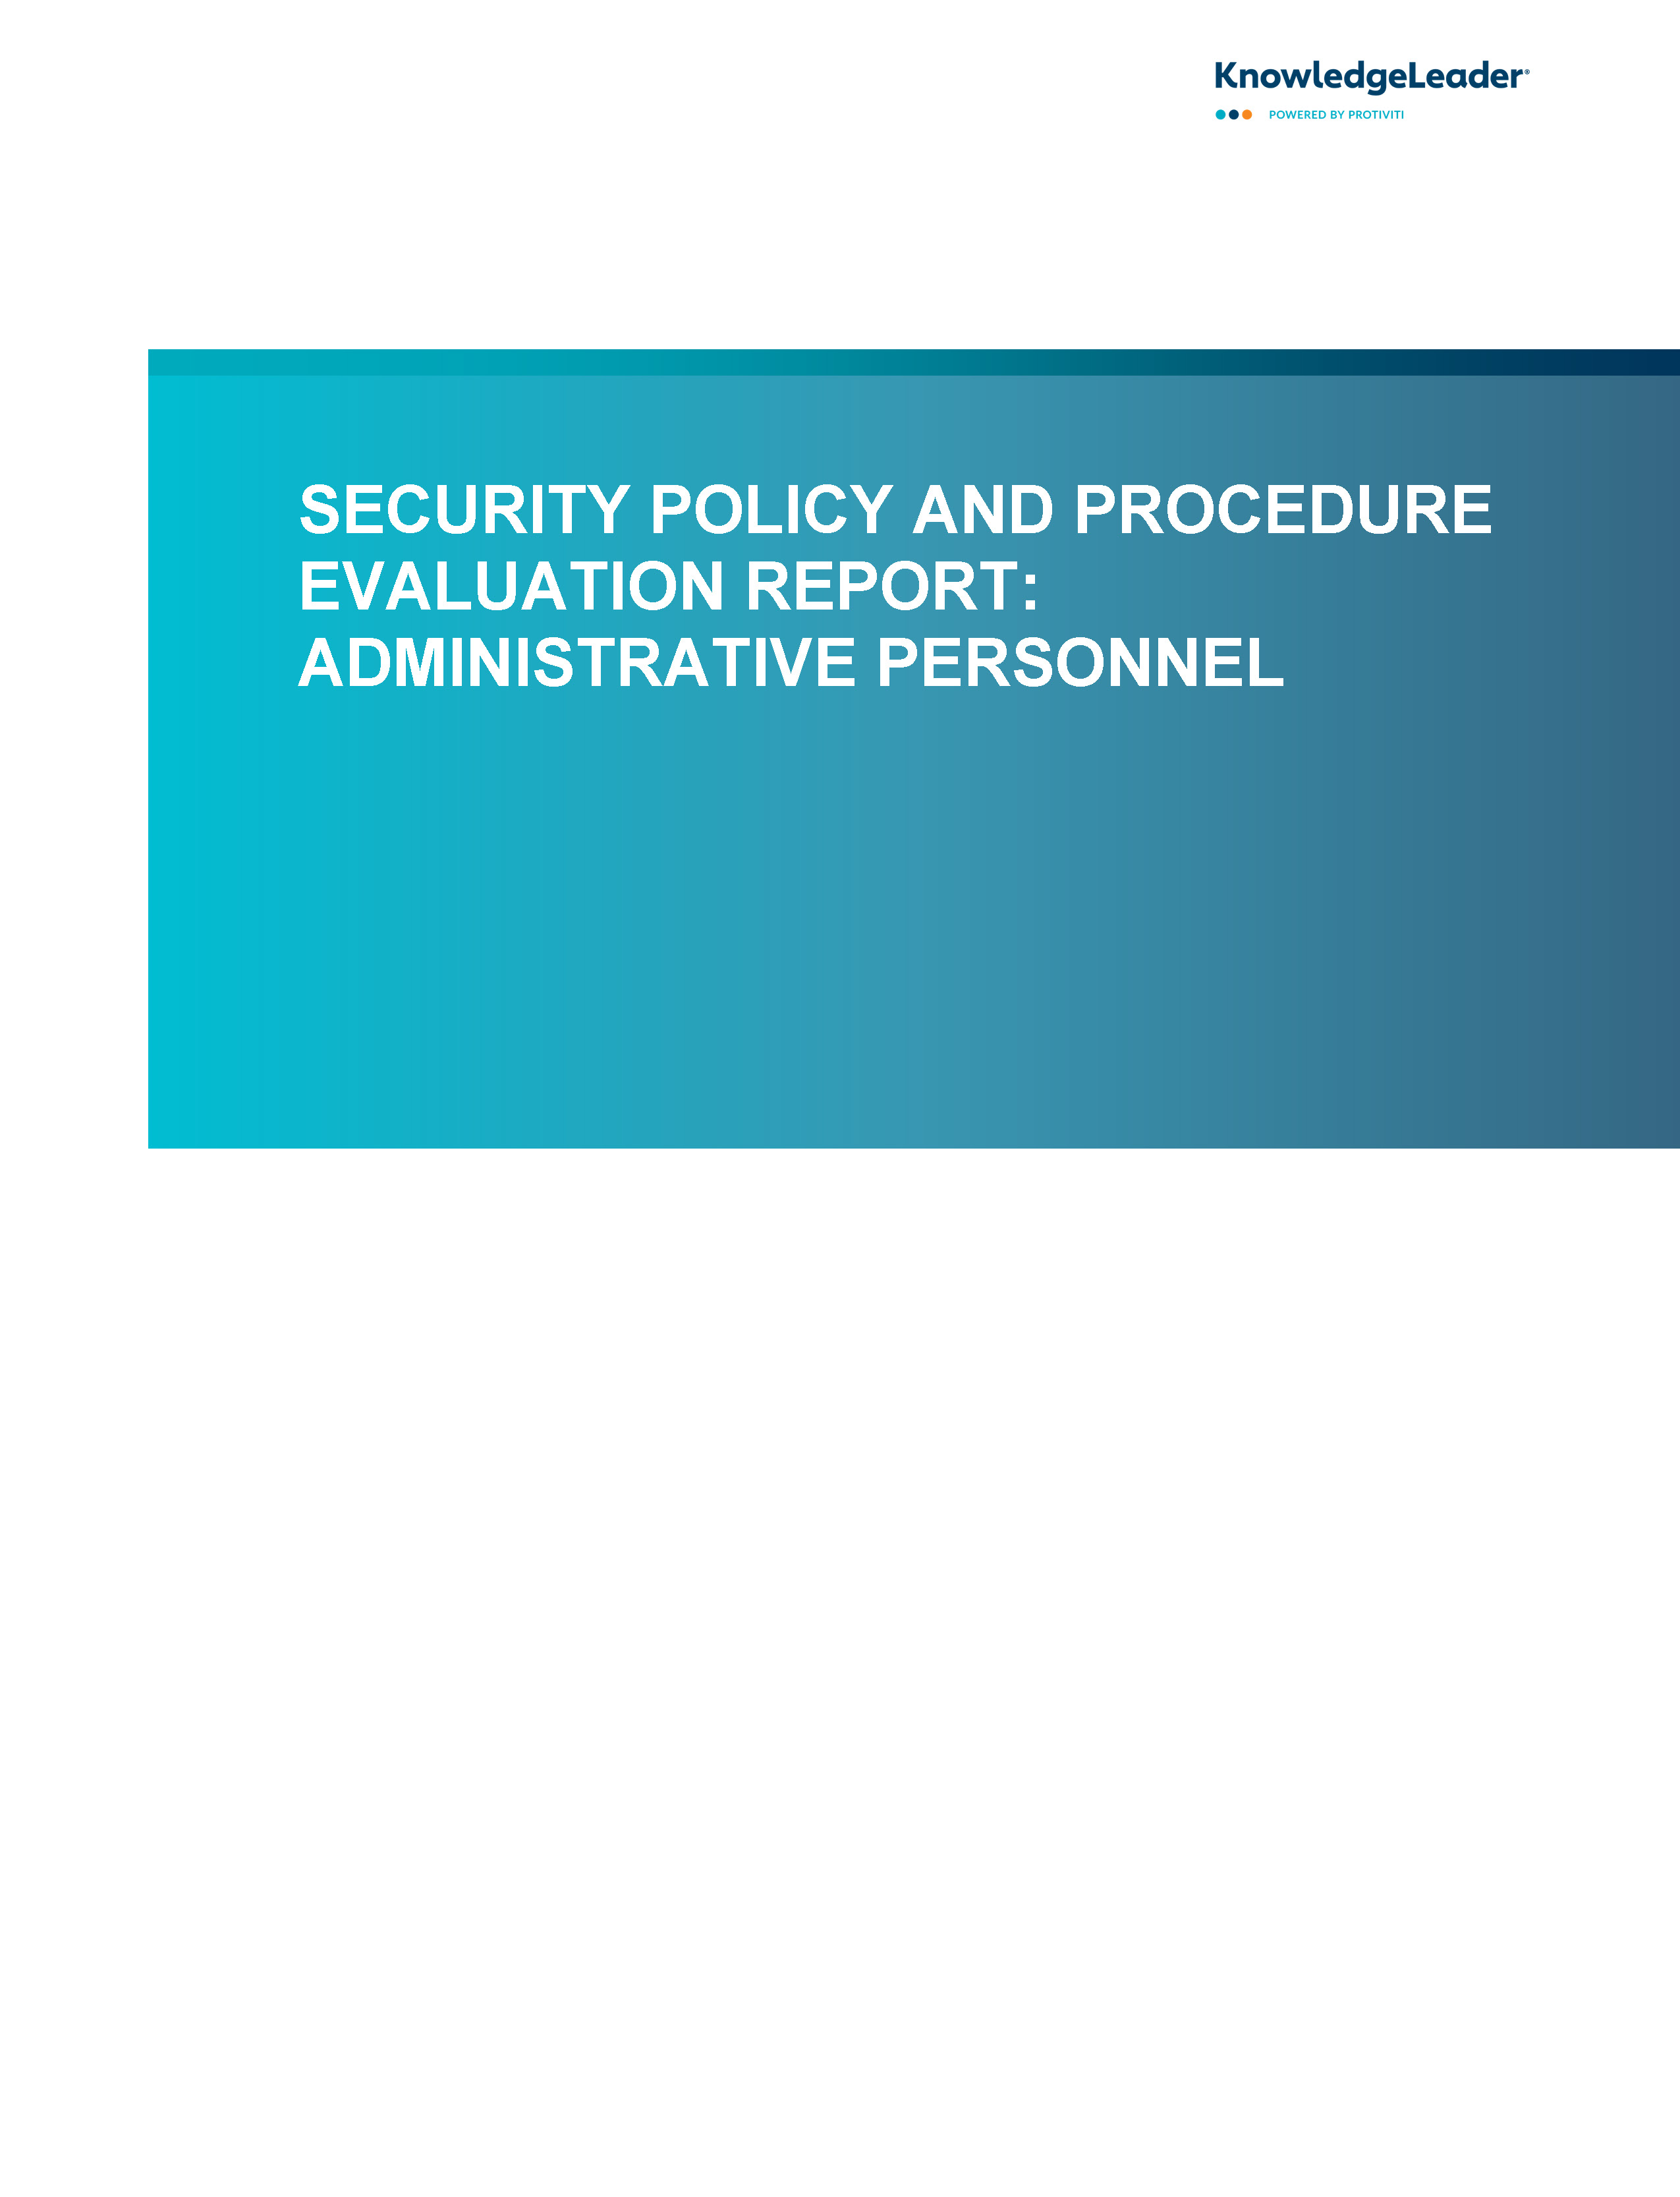 Screenshot of the first page of Security Policy and Procedure Evaluation Report - Administrative Personnel